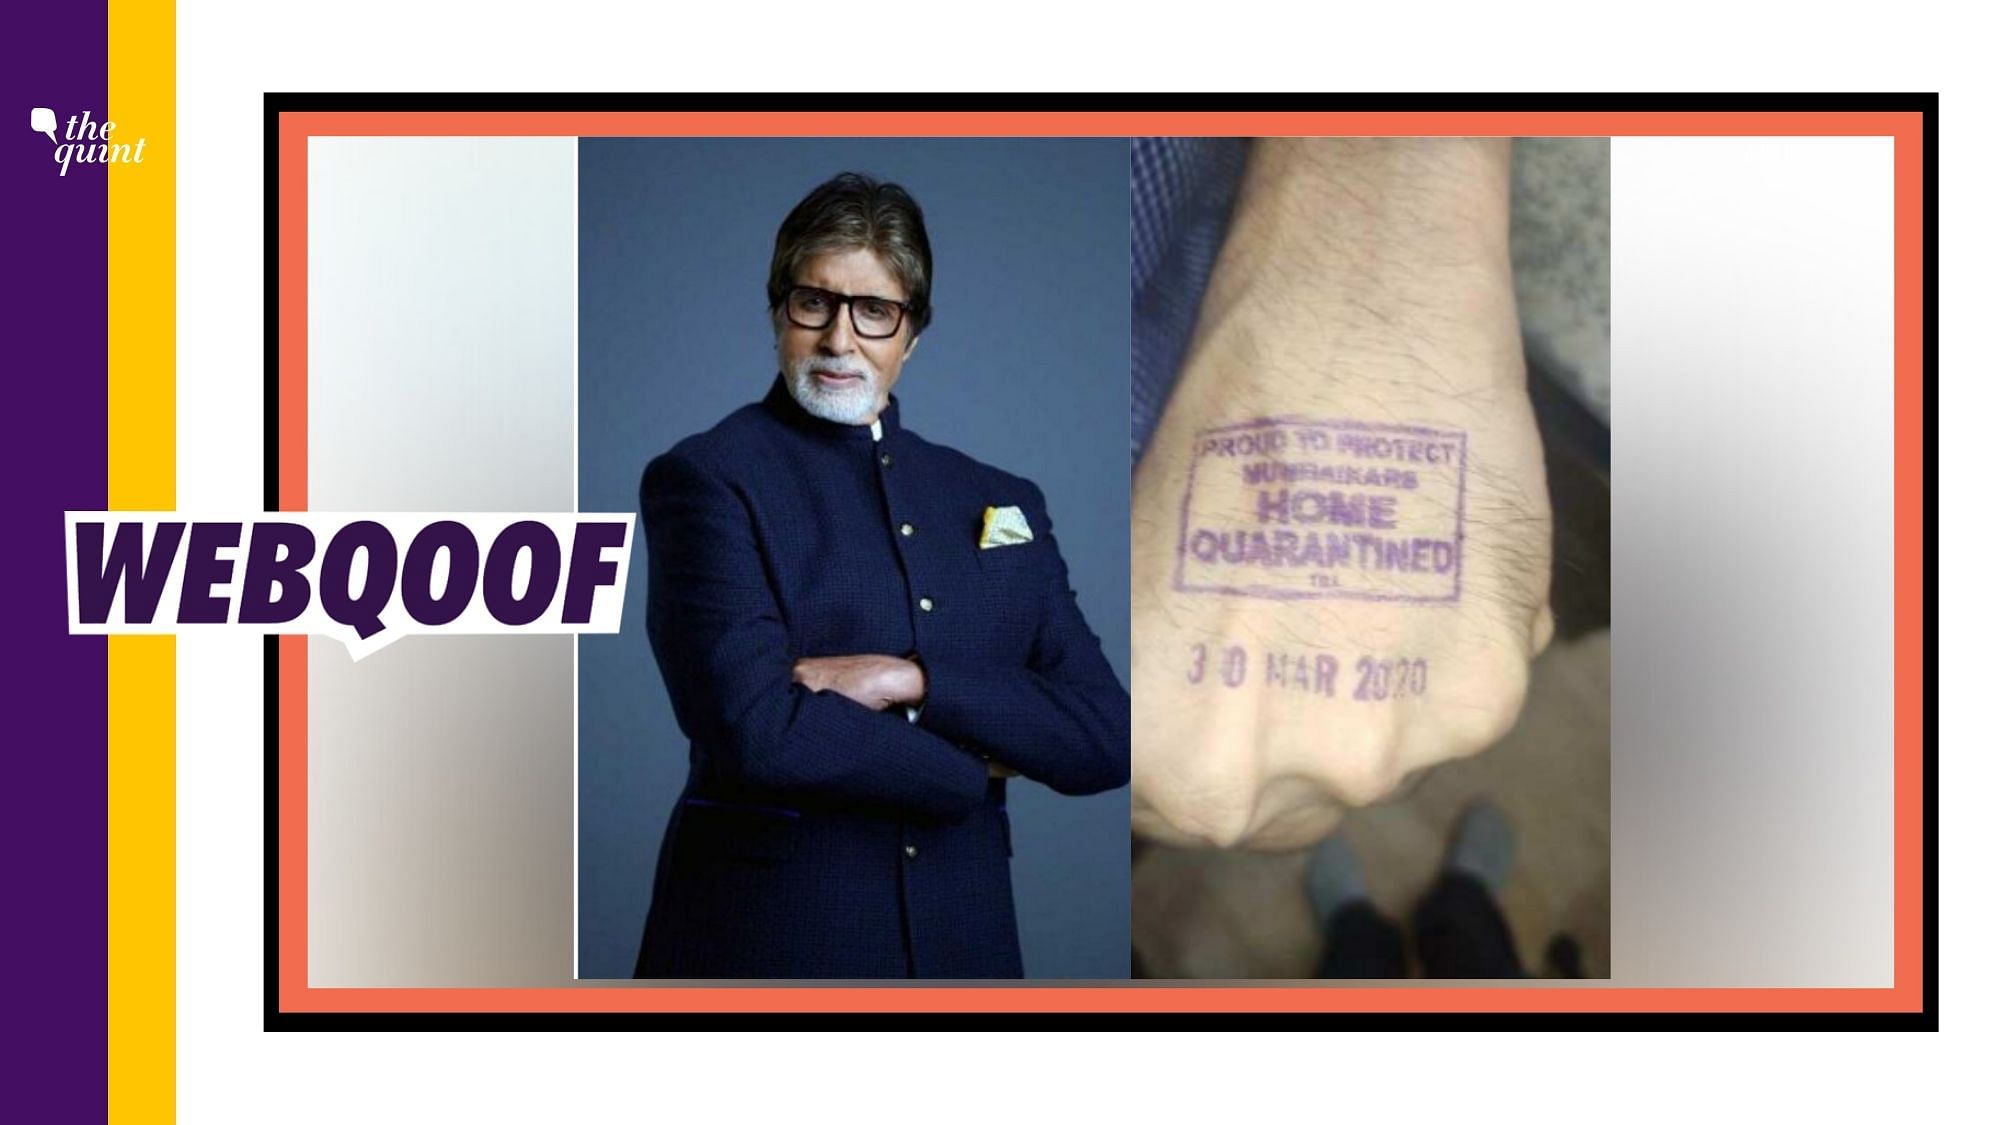 Amitabh Bachchan shared the image of a hand with the ‘home quarantined’ stamp from a WhatsApp forward.